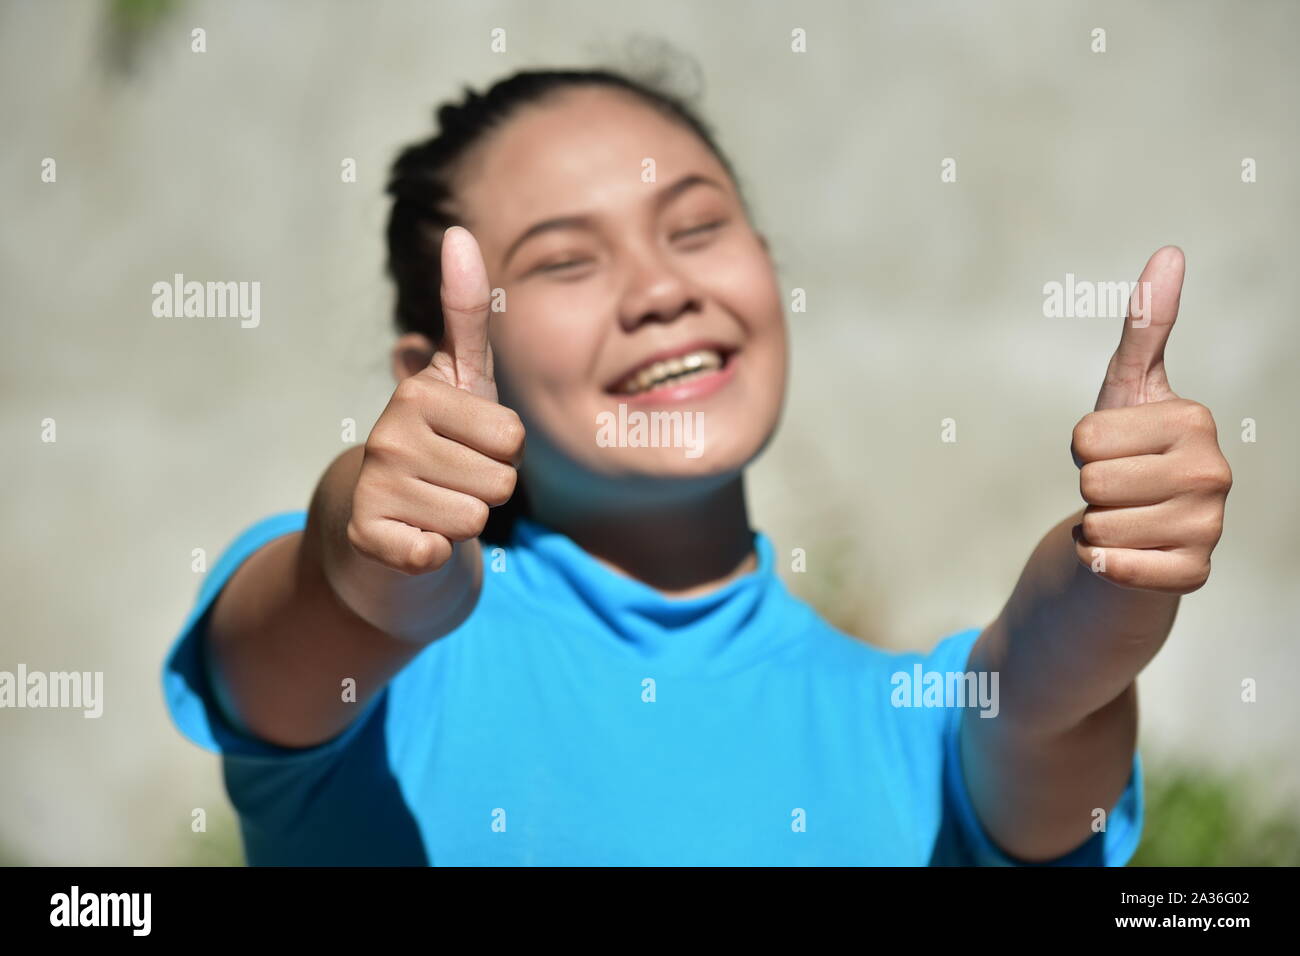 An A Proud Female Woman Stock Photo